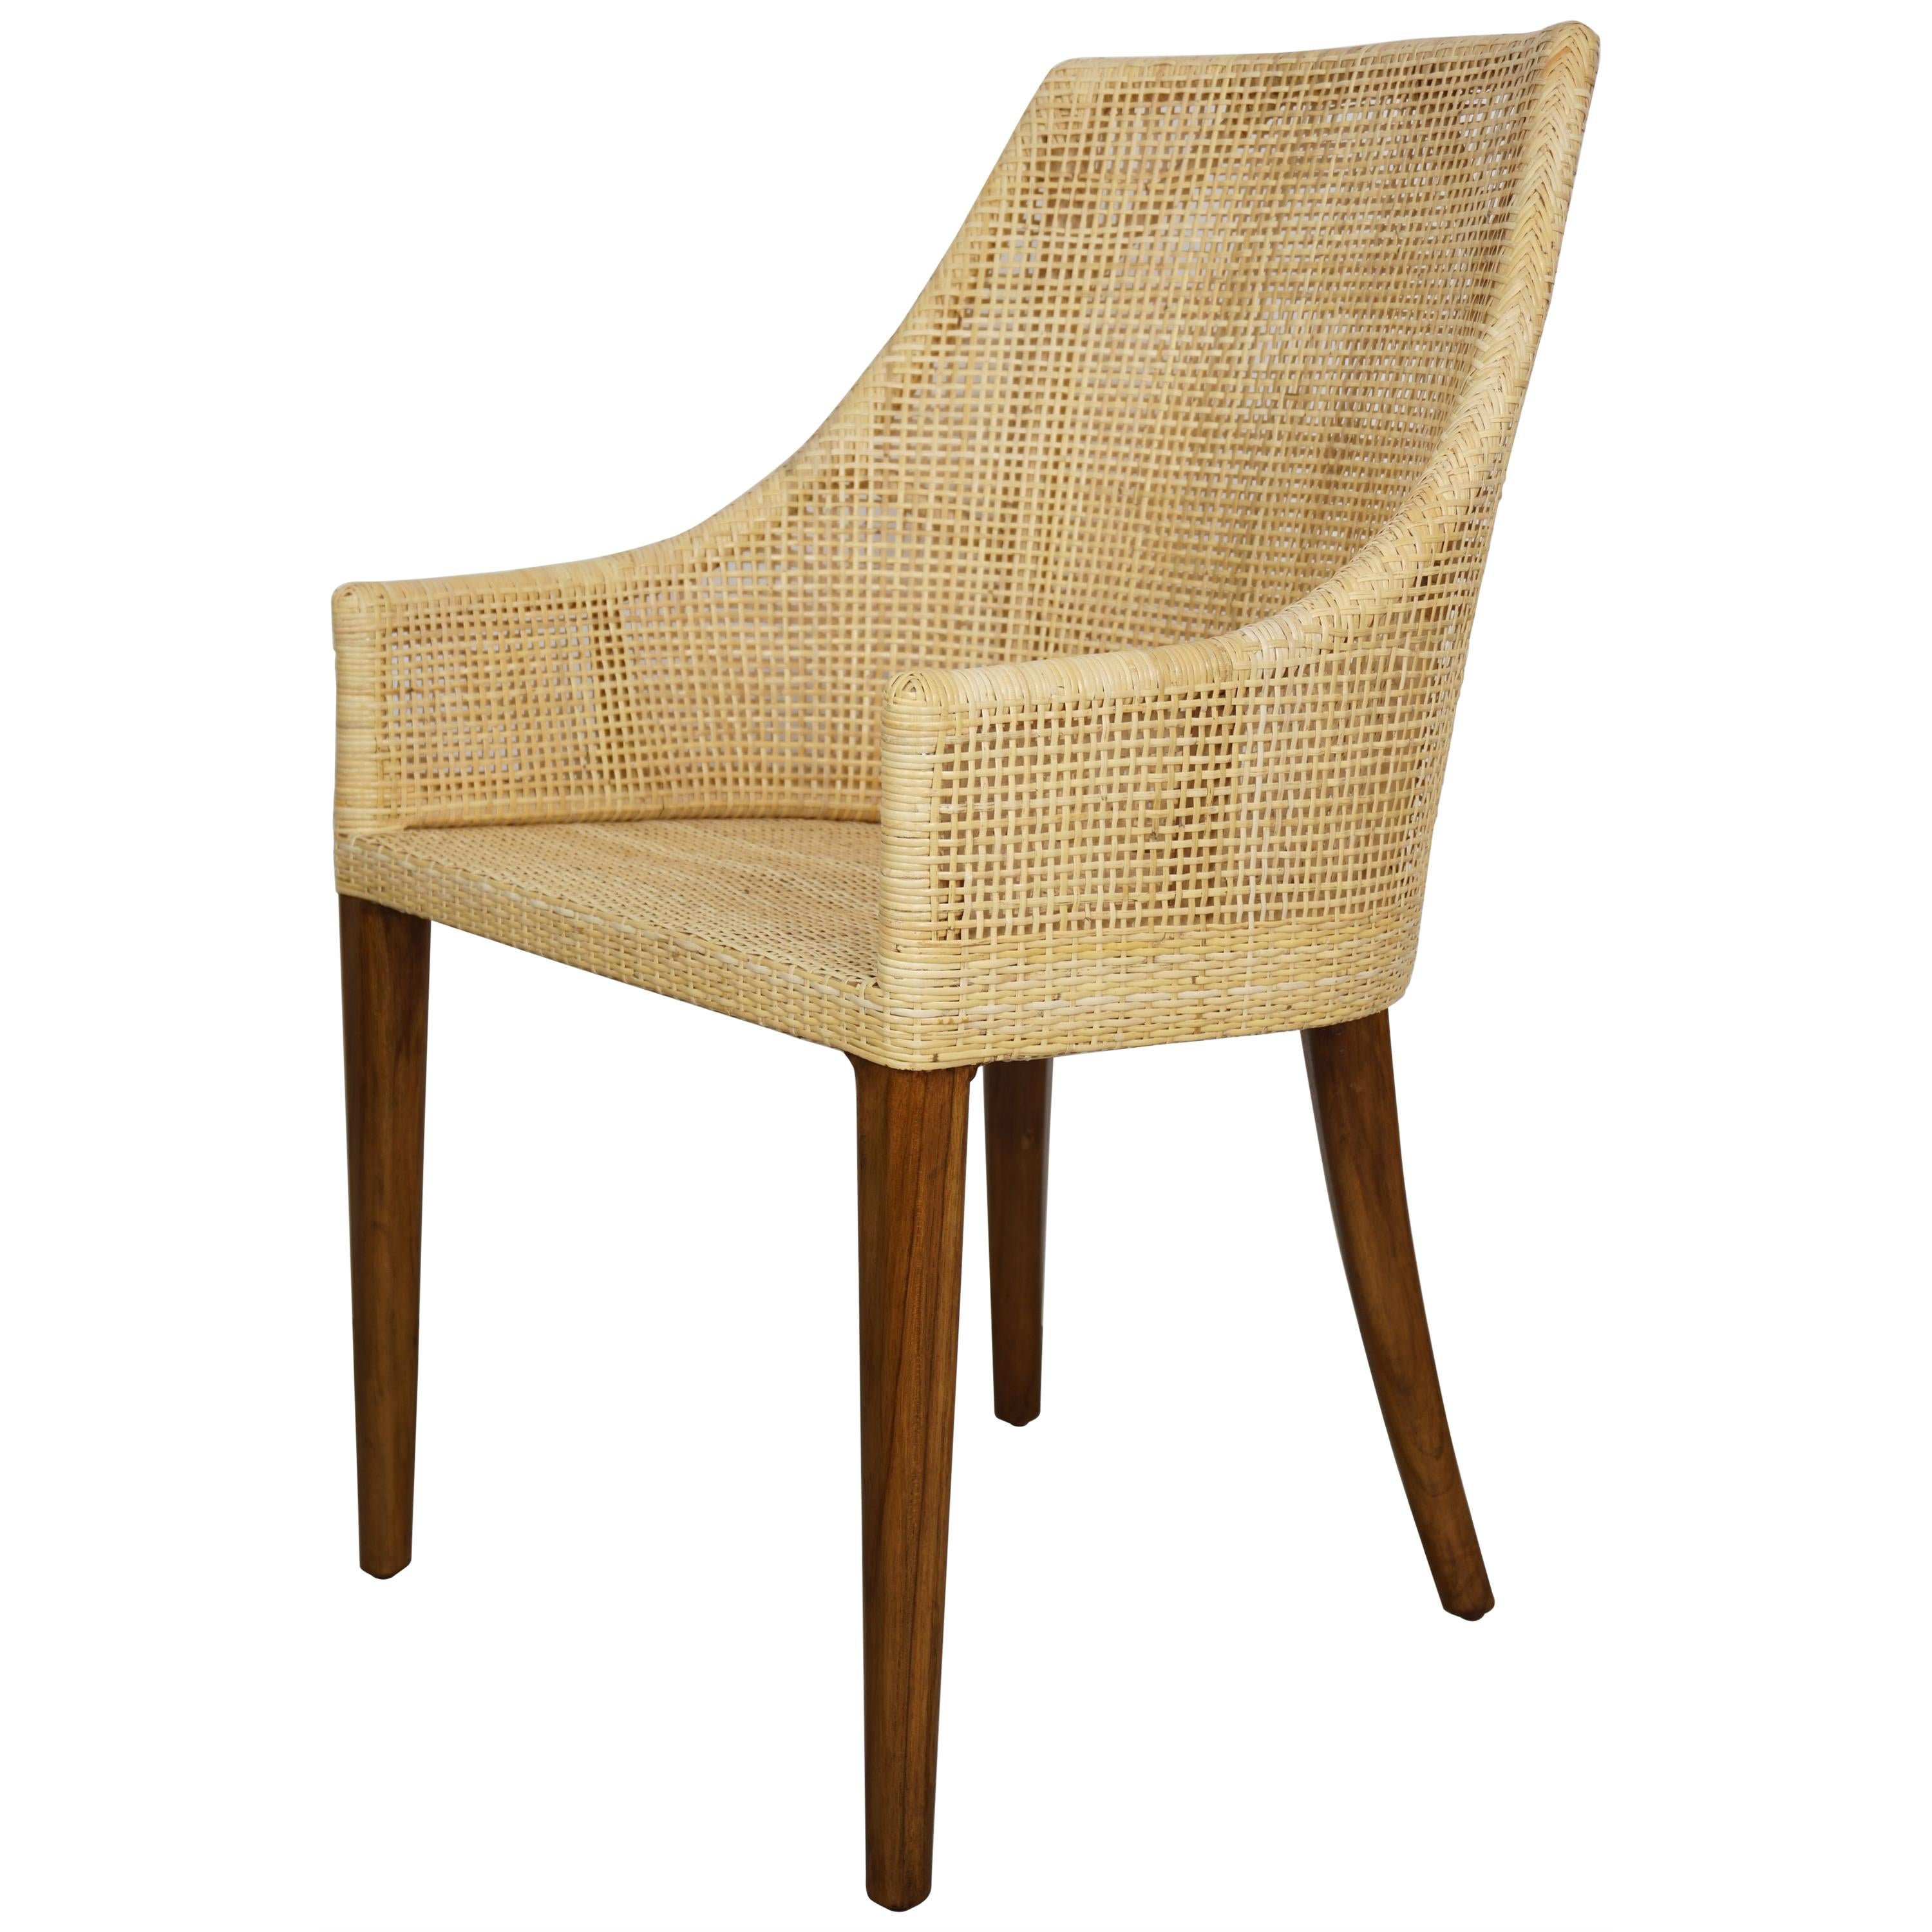 Handmade Braided Cane Rattan and Solid Wood Chair For Sale